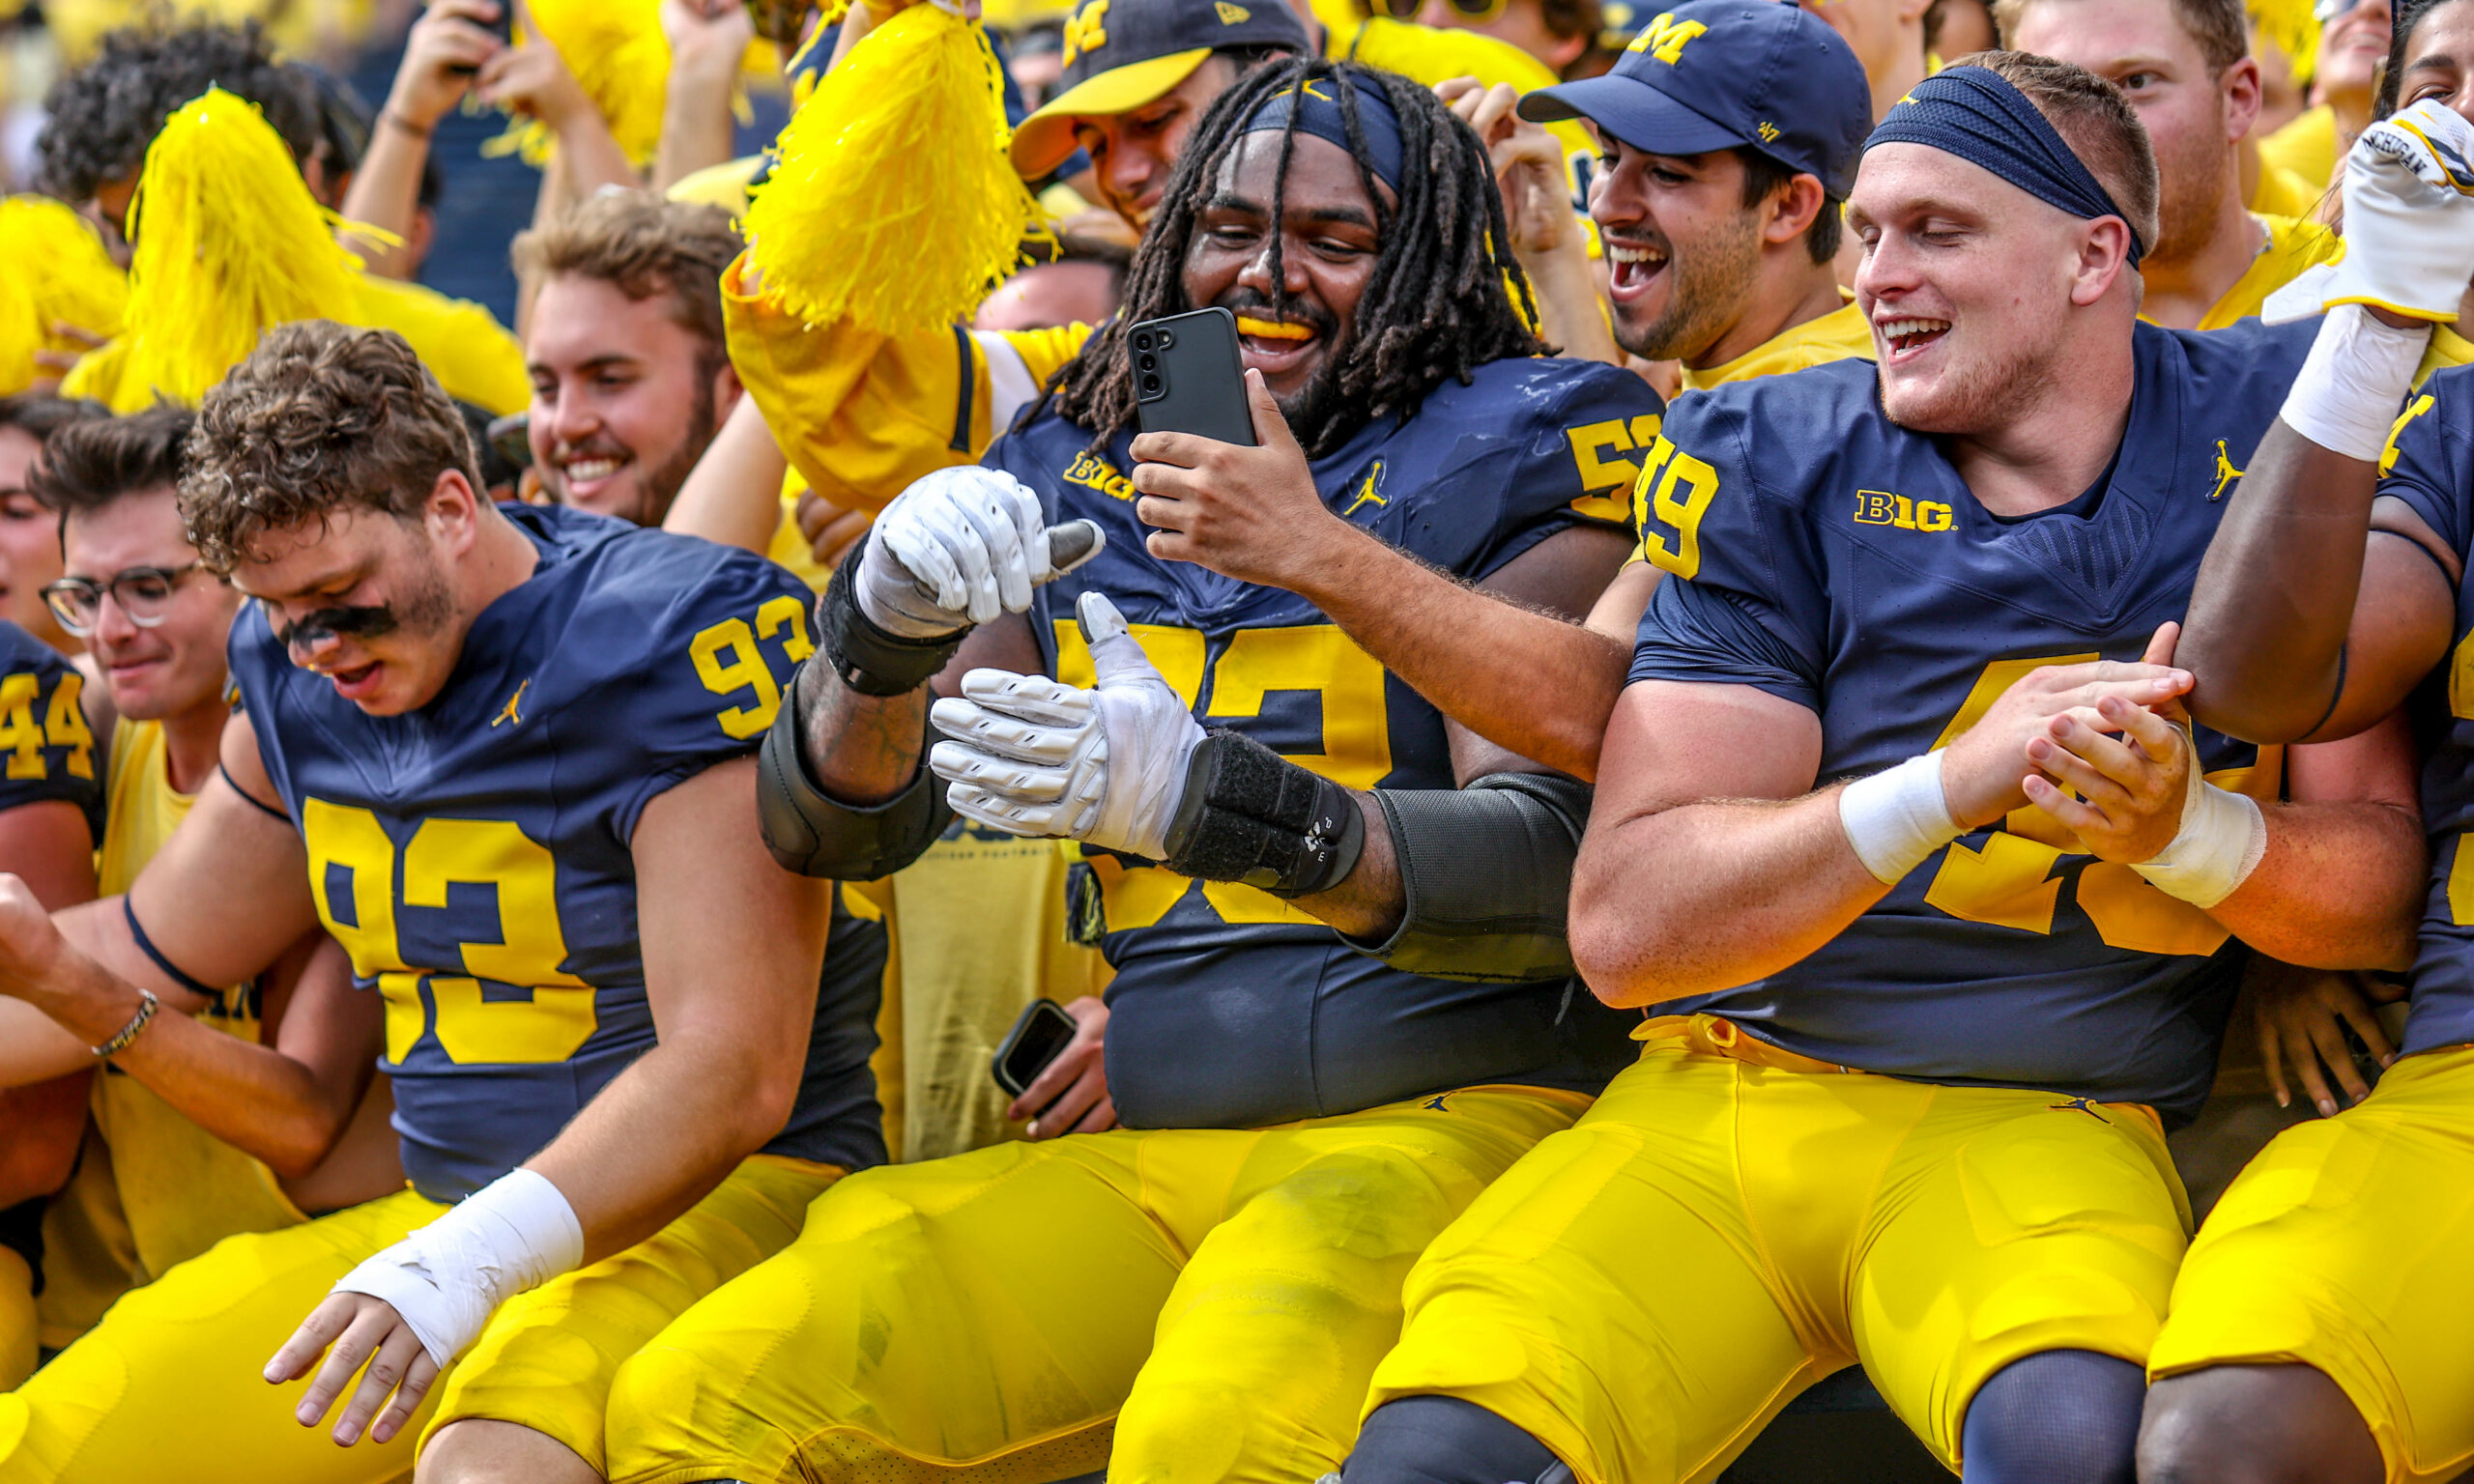 Things you may not have known about Michigan football’s 30-3 win over ECU